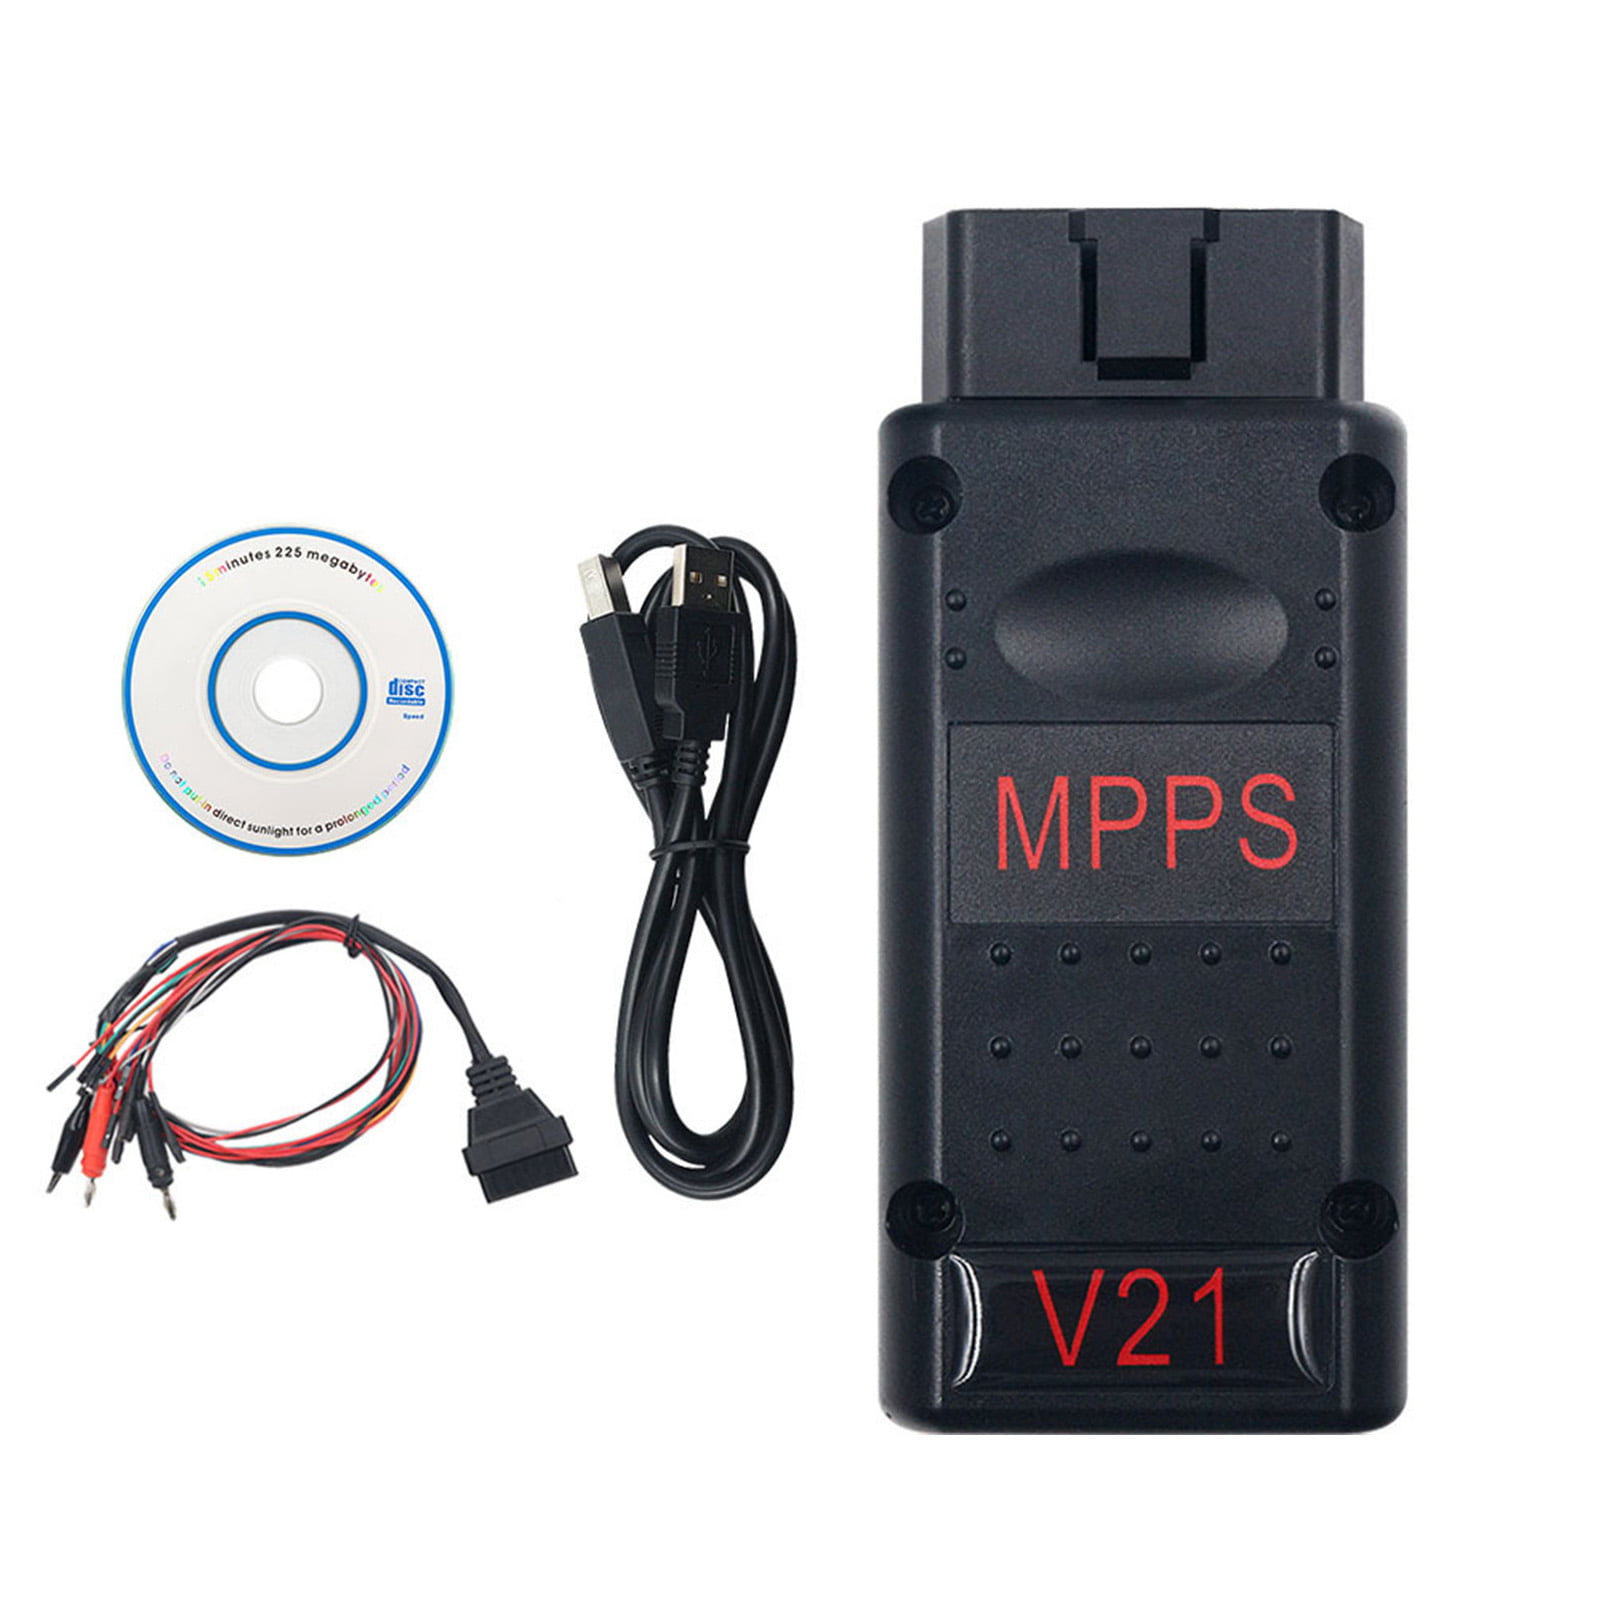 Famure ECU Chip Tuning Scanner Car Tuning MPPS V21 Main+Tricore+Multiboot  Tricore Cable ECU Chip Tuning Scanner for Car Diagnostic